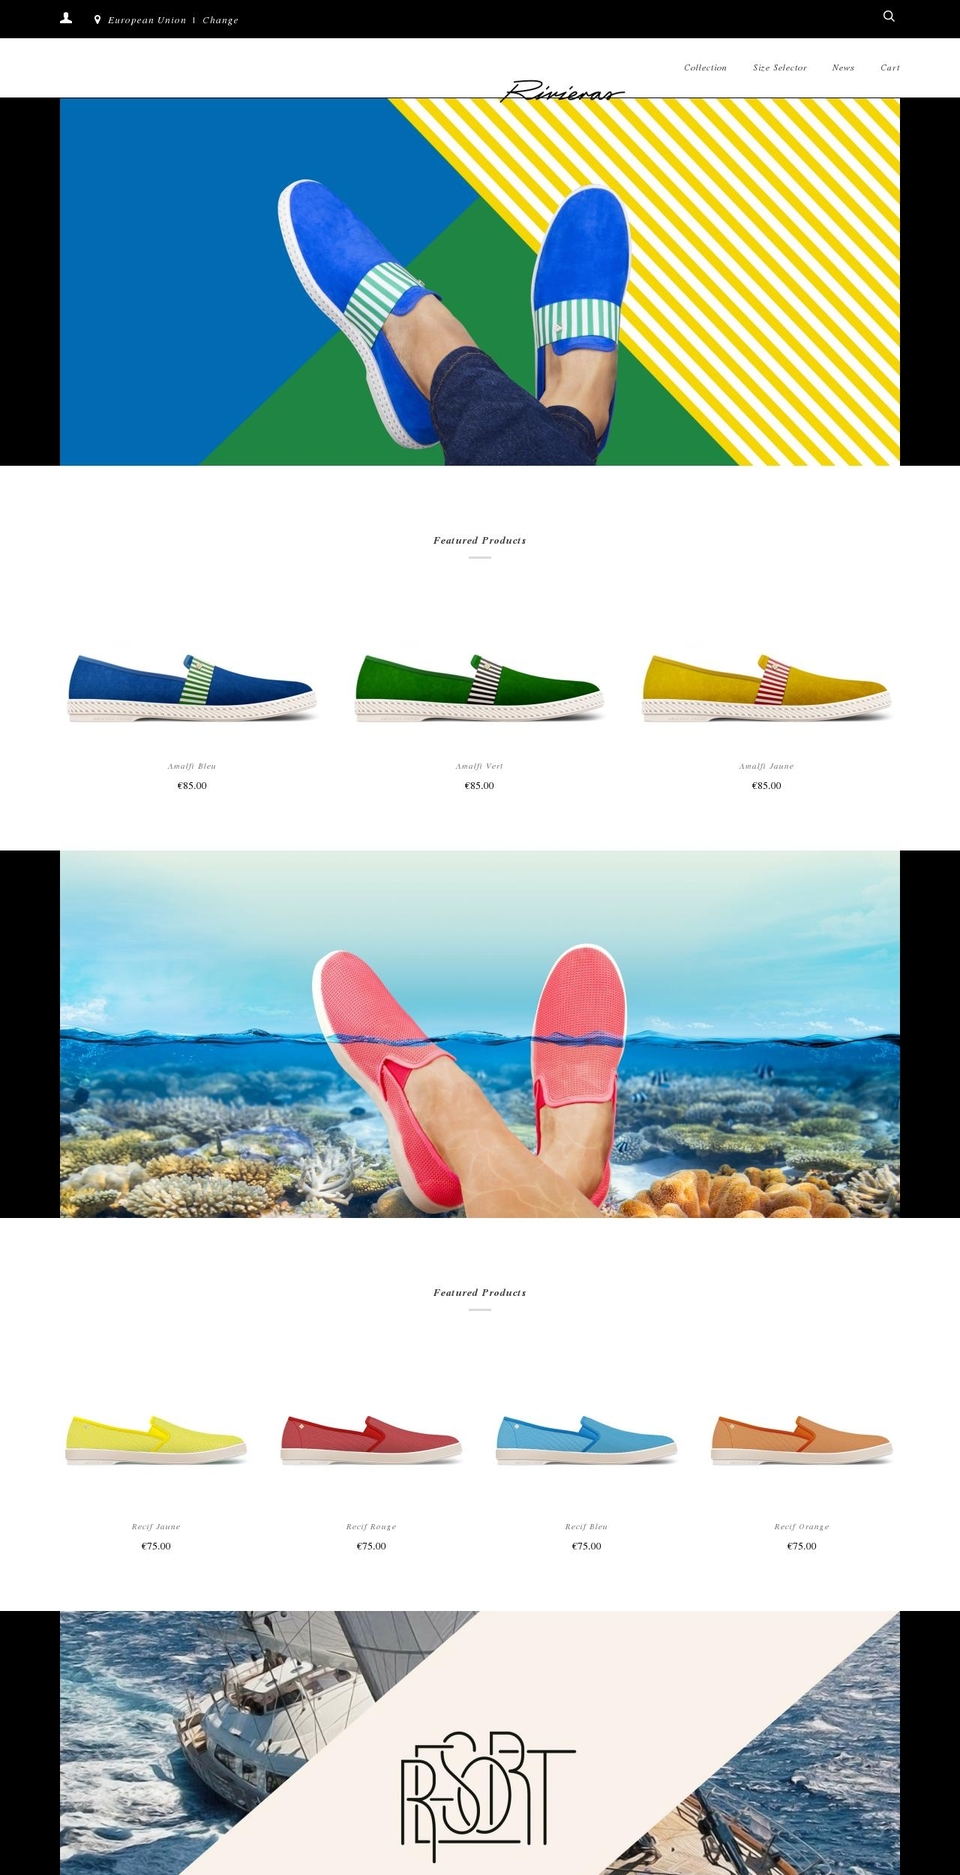 Rivieras [Plus]-TH-July-30-2018 Shopify theme site example rivieras.net